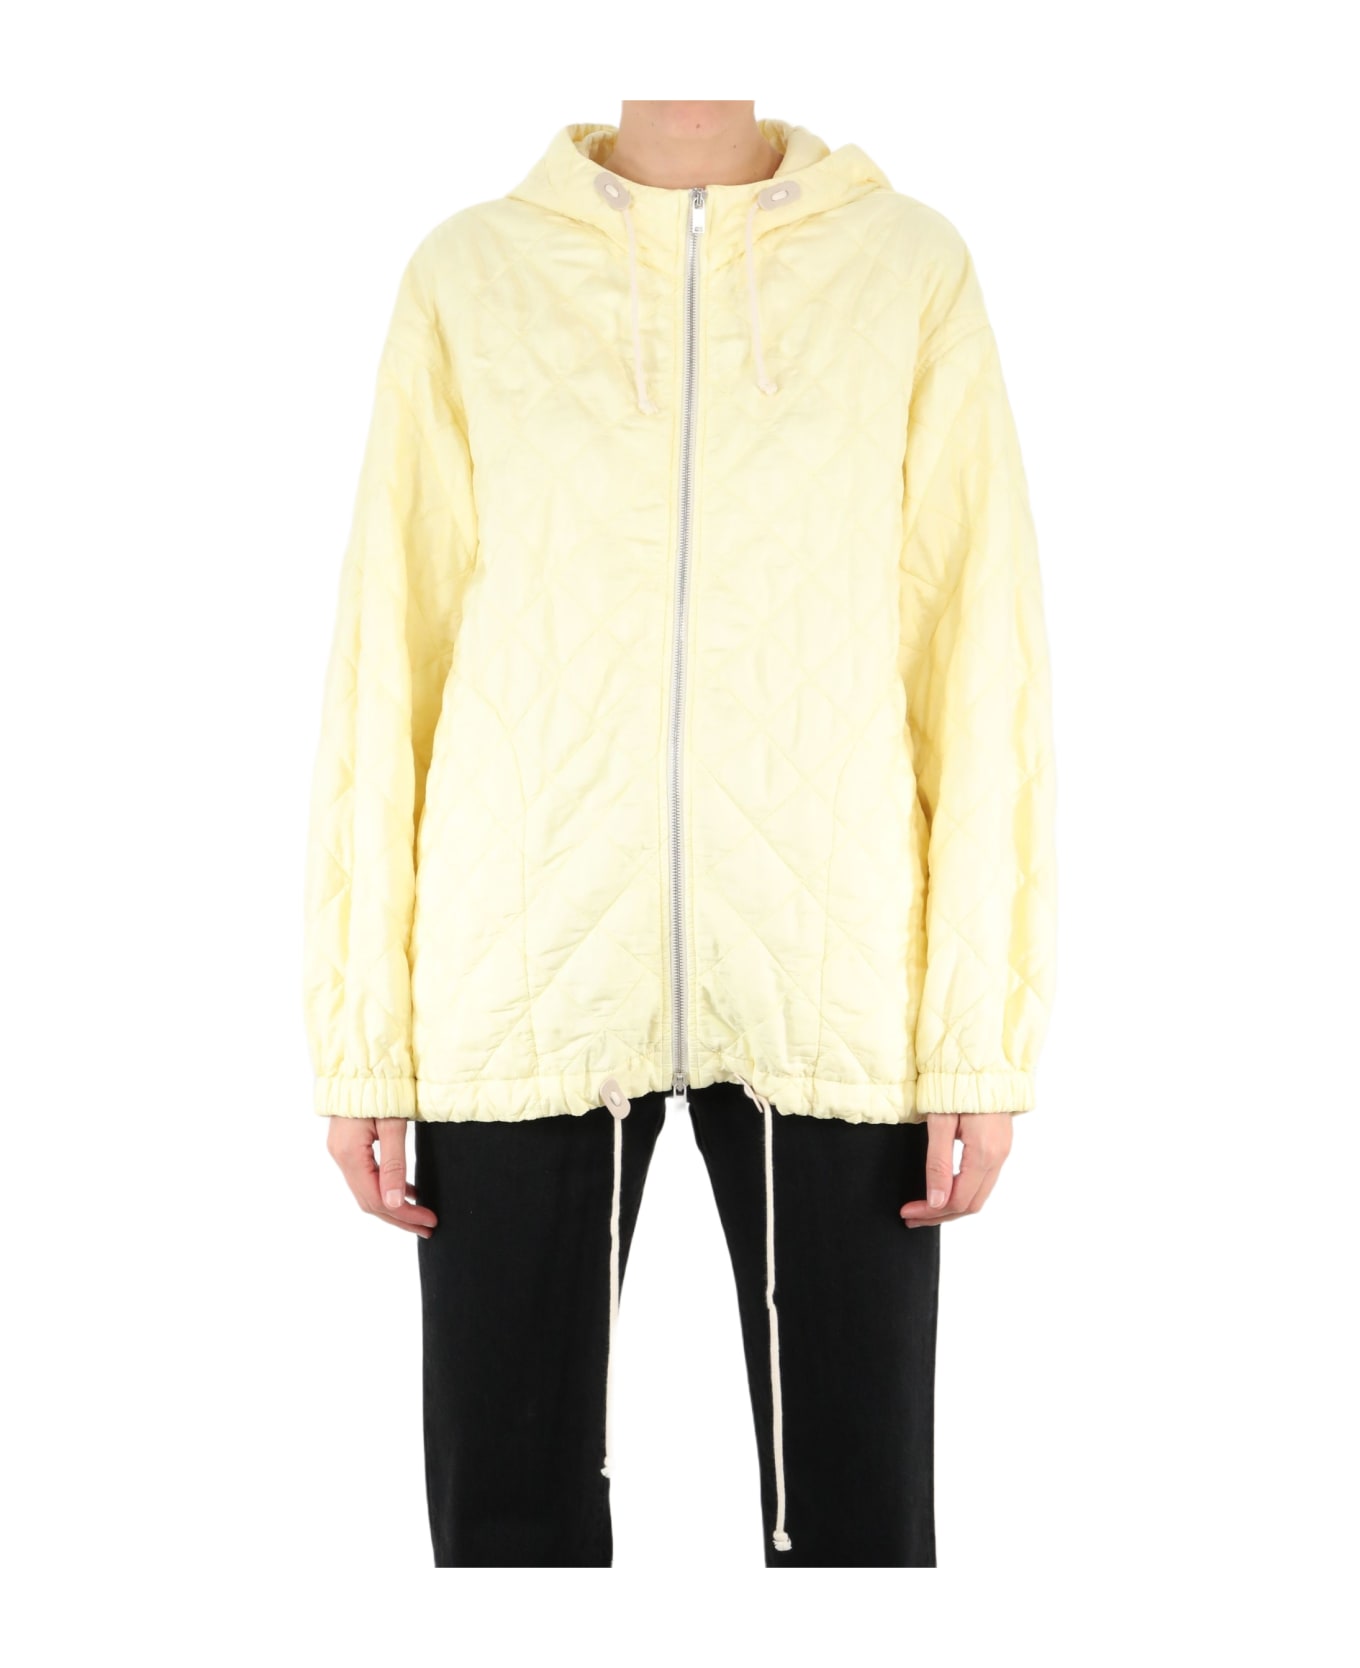 Jil Sander Yellow Quilted Jacket - YELLOW ジャケット